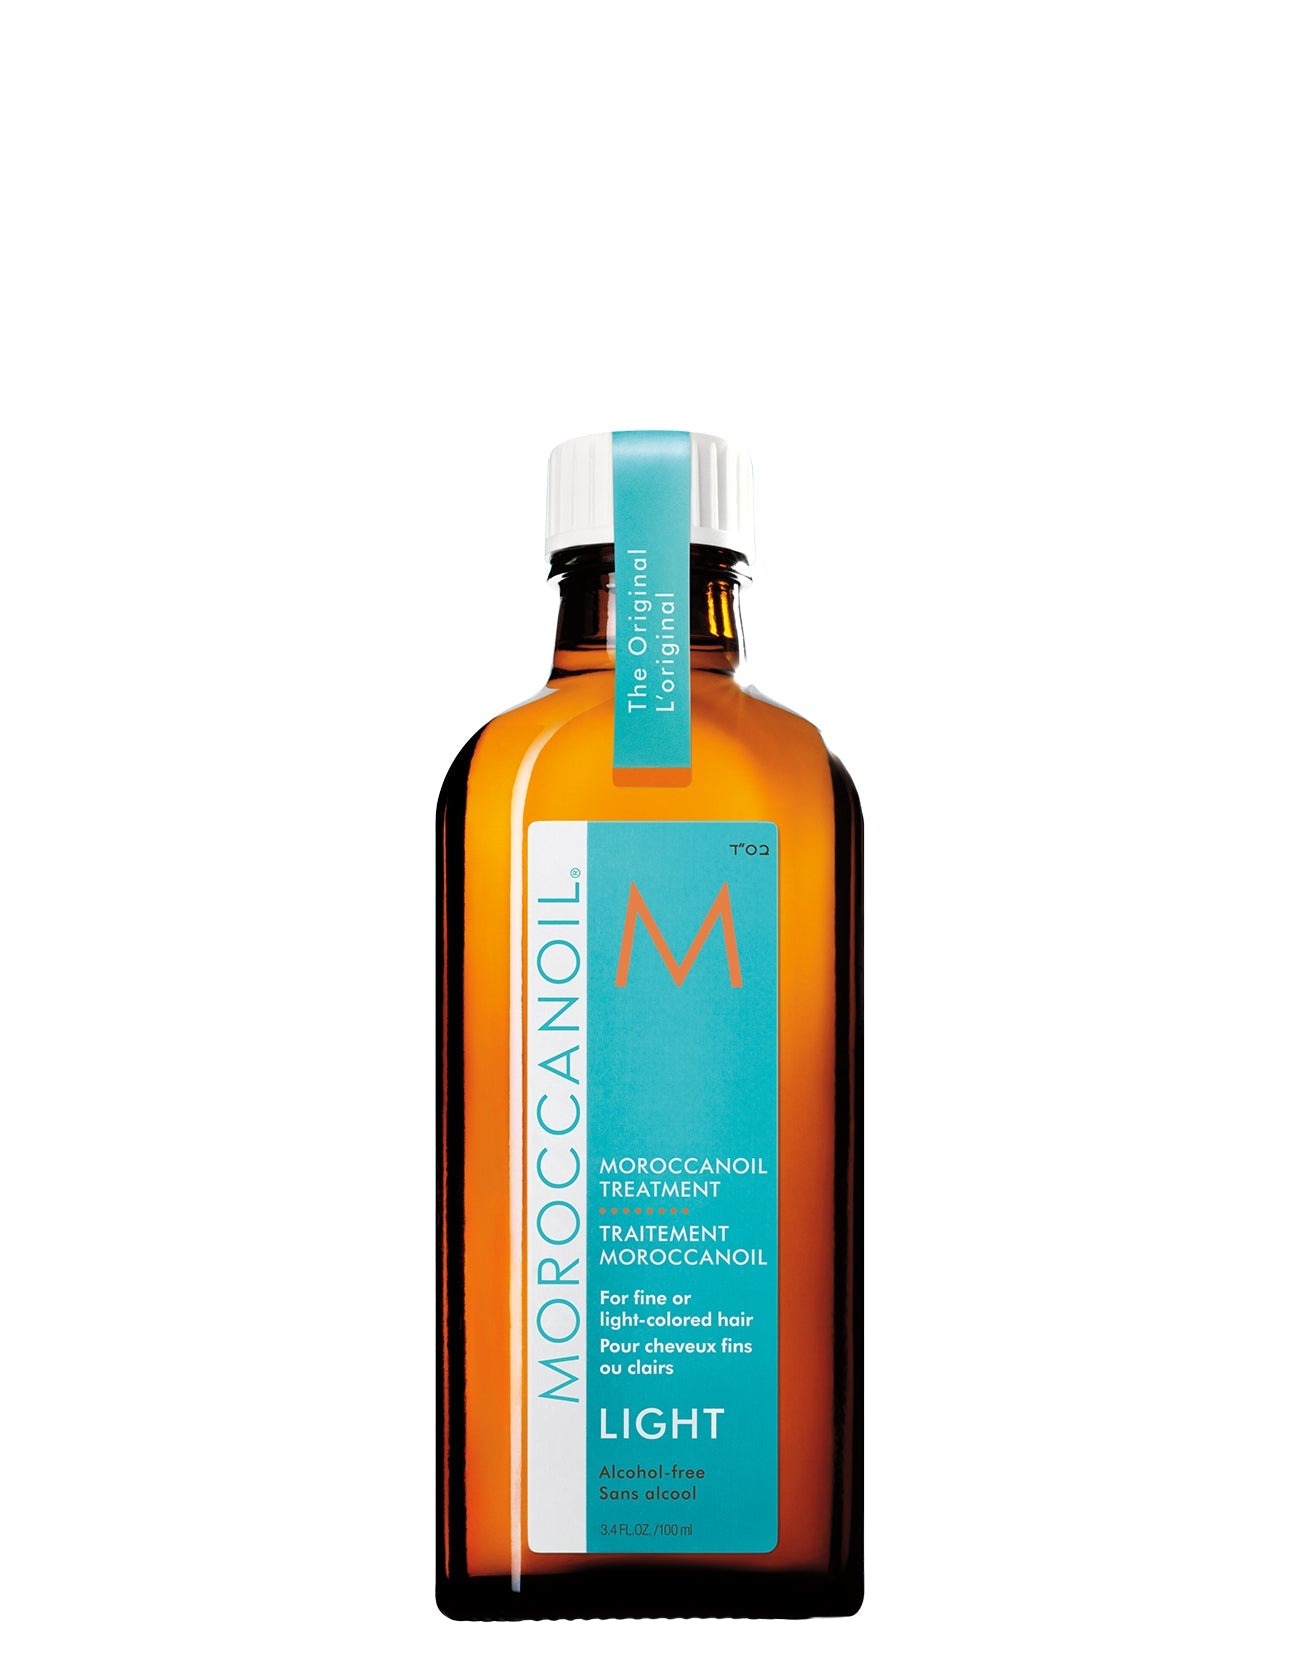 Moroccanoil Behandlung Light + Gratis 10ml Color Care Shampoo and Conditioner